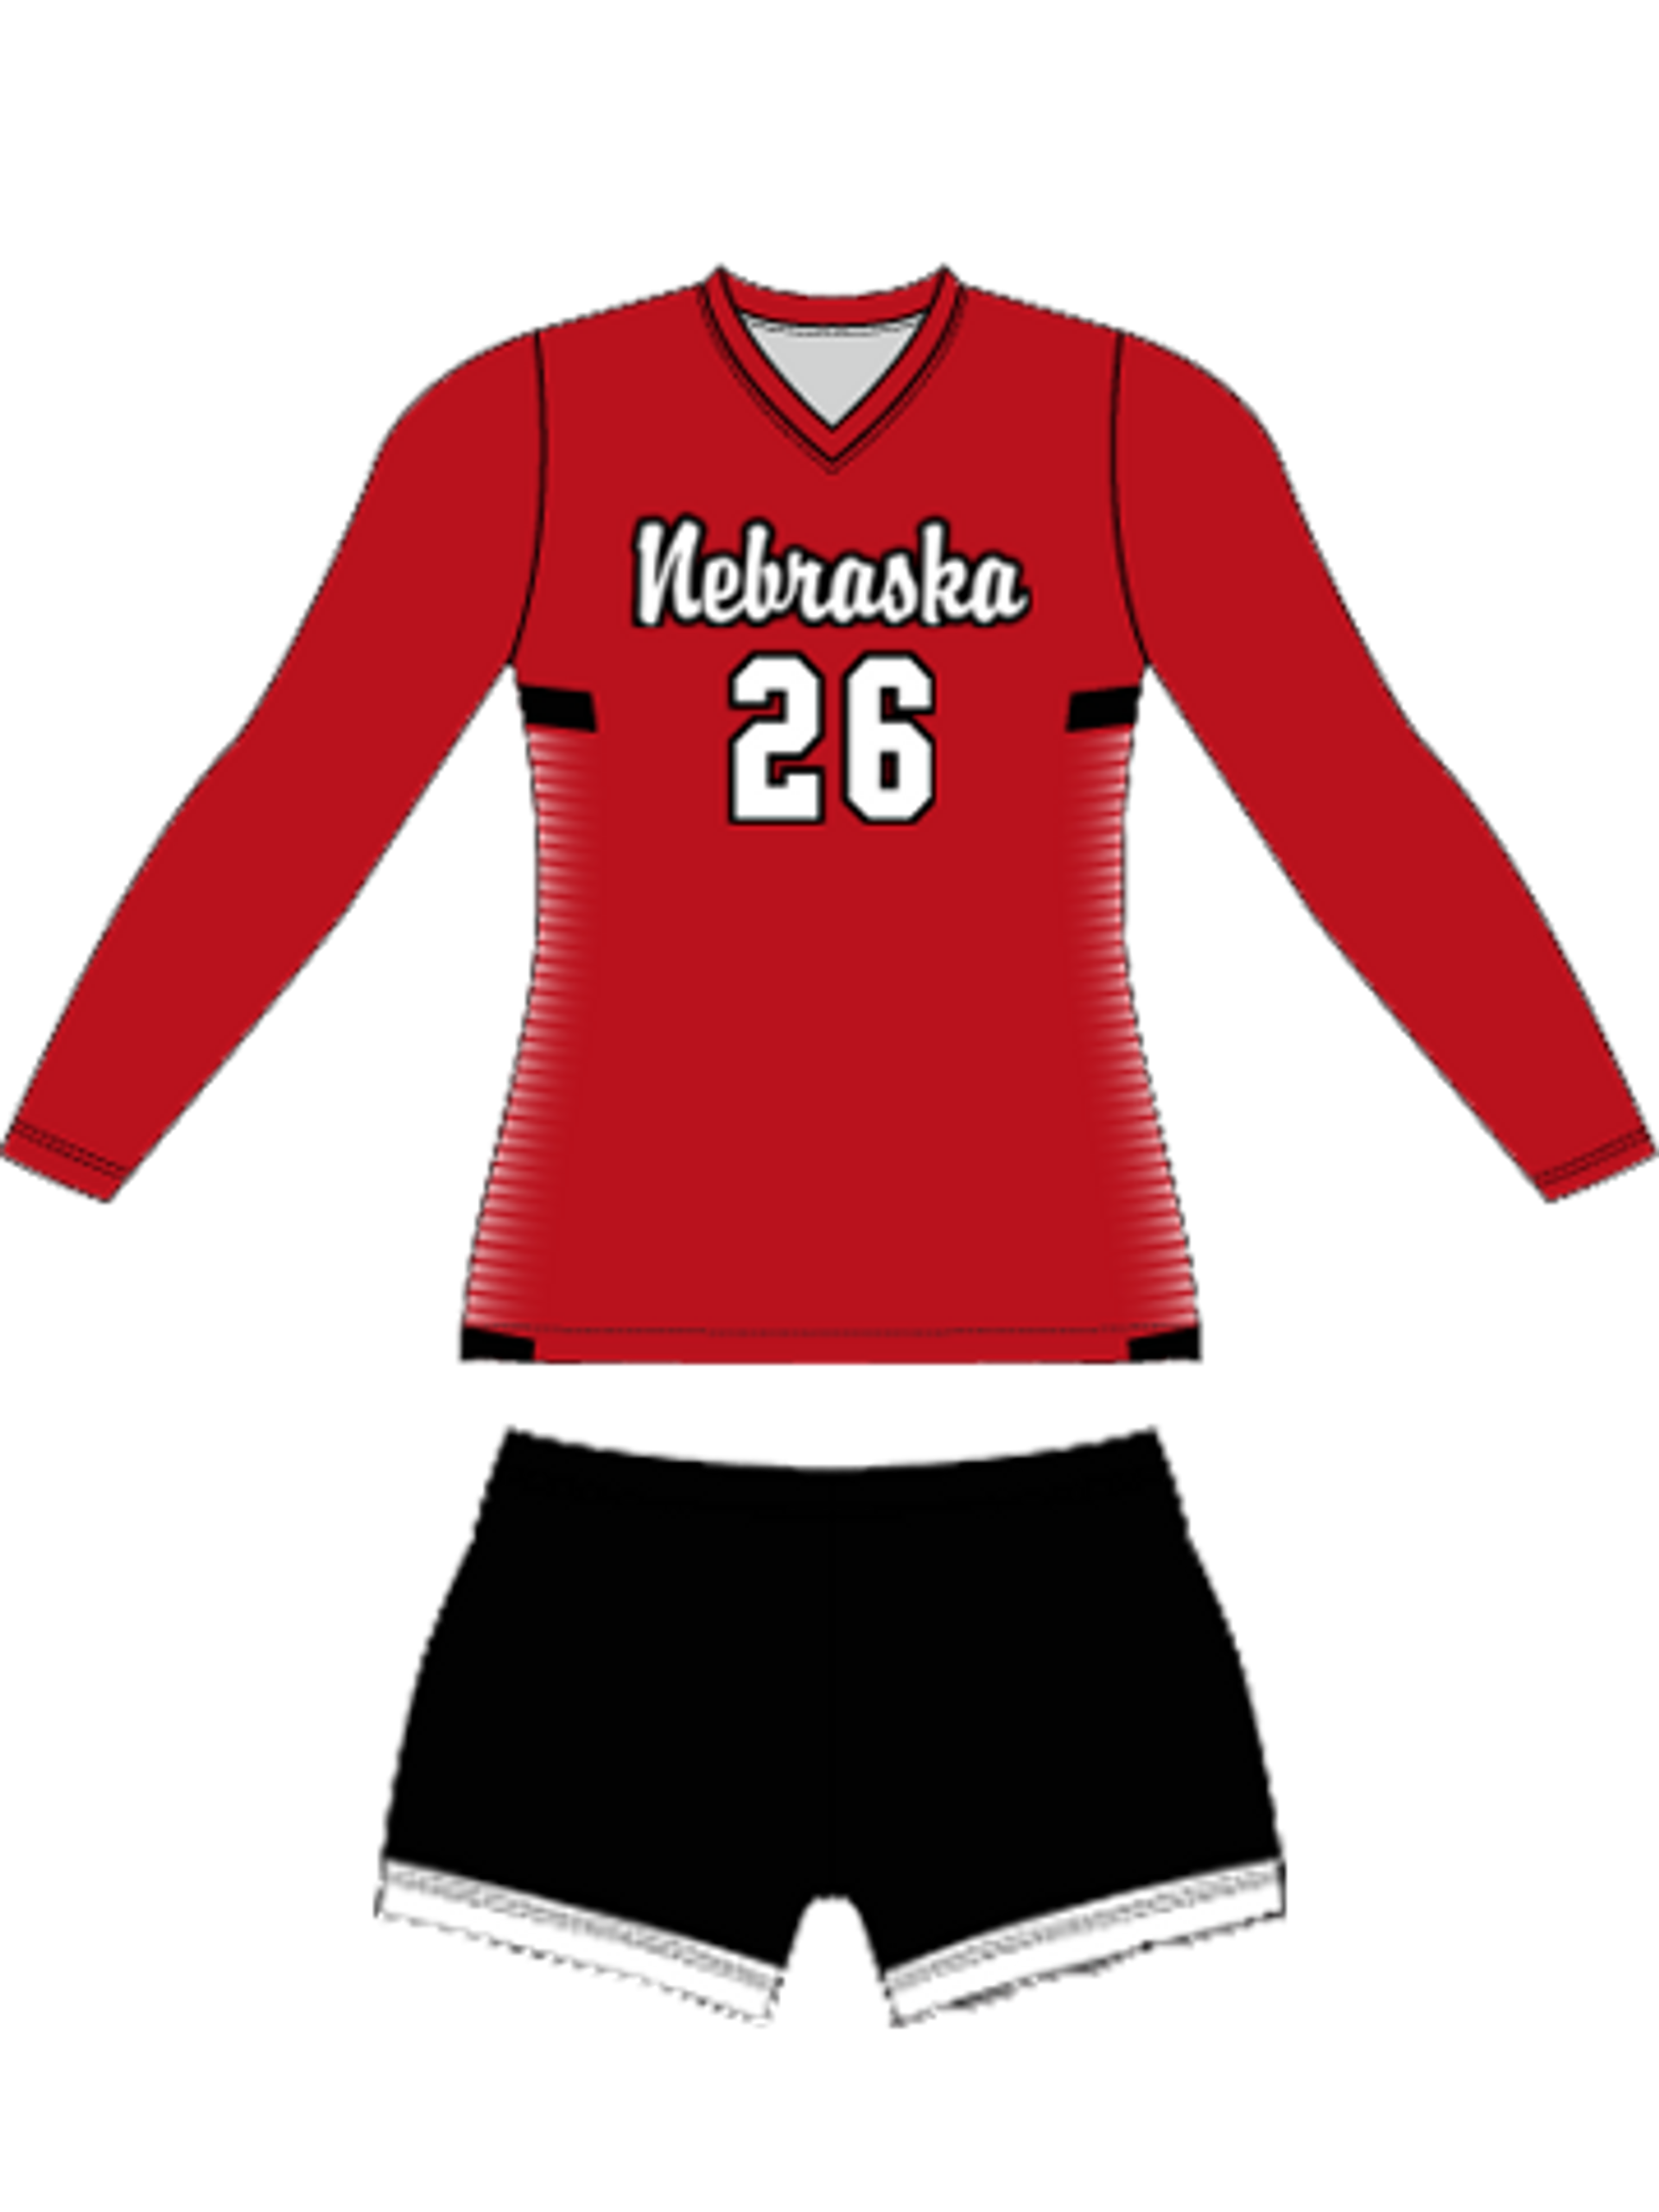 Volleyball - Volleyball - Control Series - Sublimated Uniforms ...